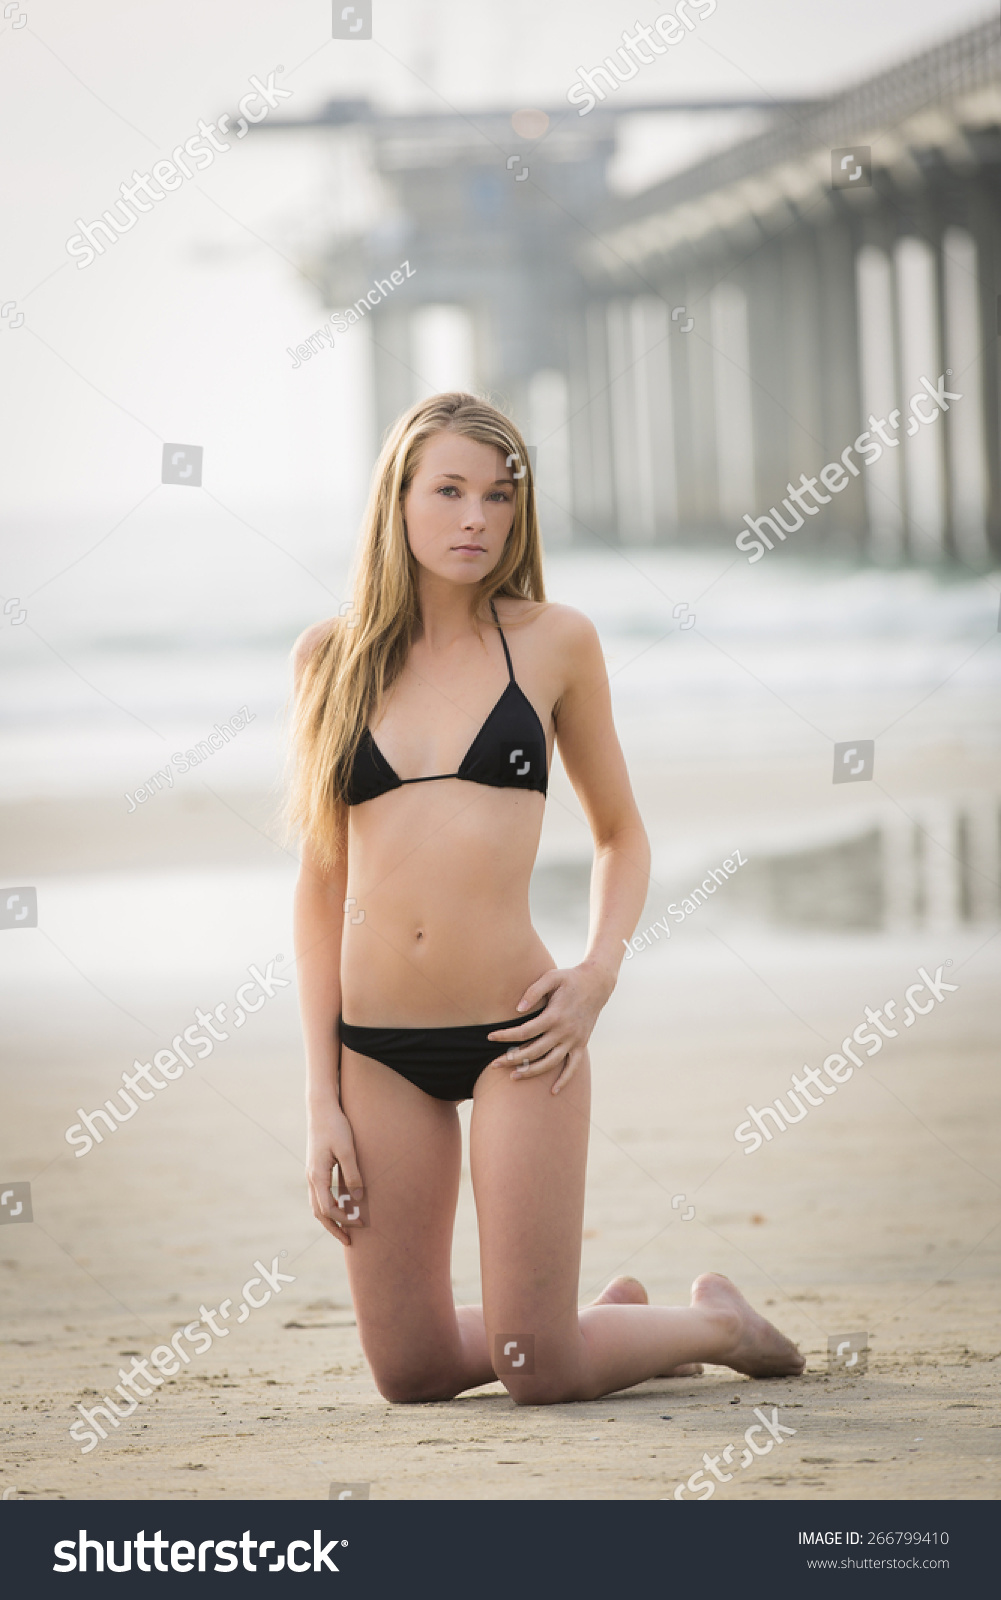 Hot blonde teen girl Beautiful Young Blonde Girl Posing On Stock Photo Edit Now 266799410